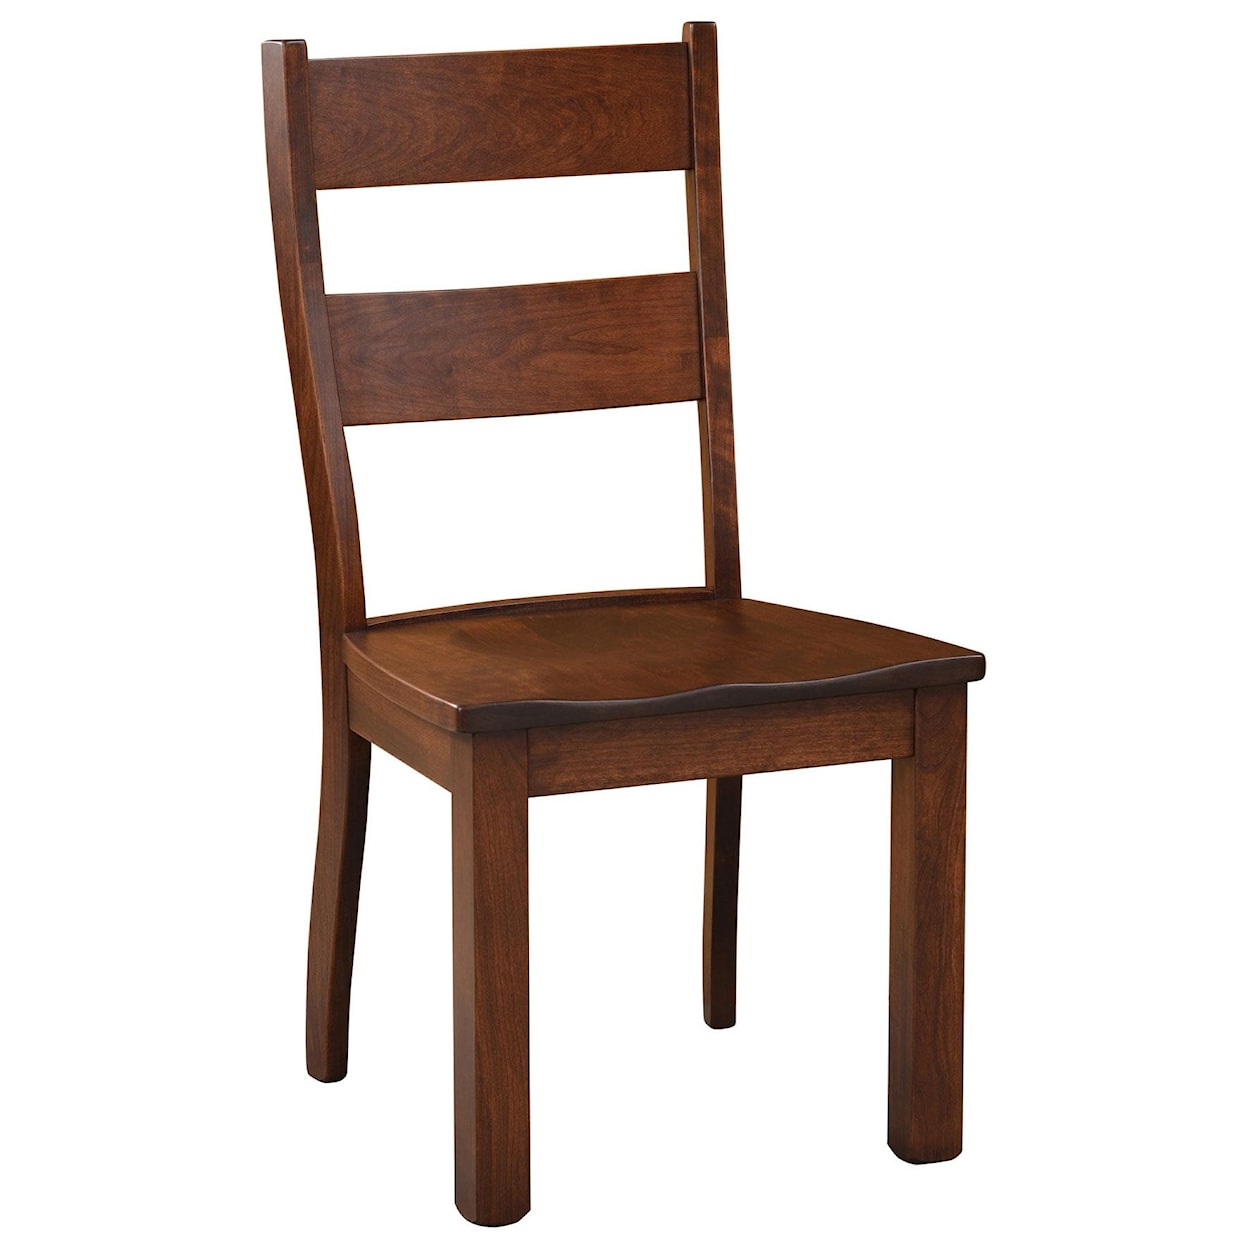 Wengerd Wood Products Amhurst Side Chair